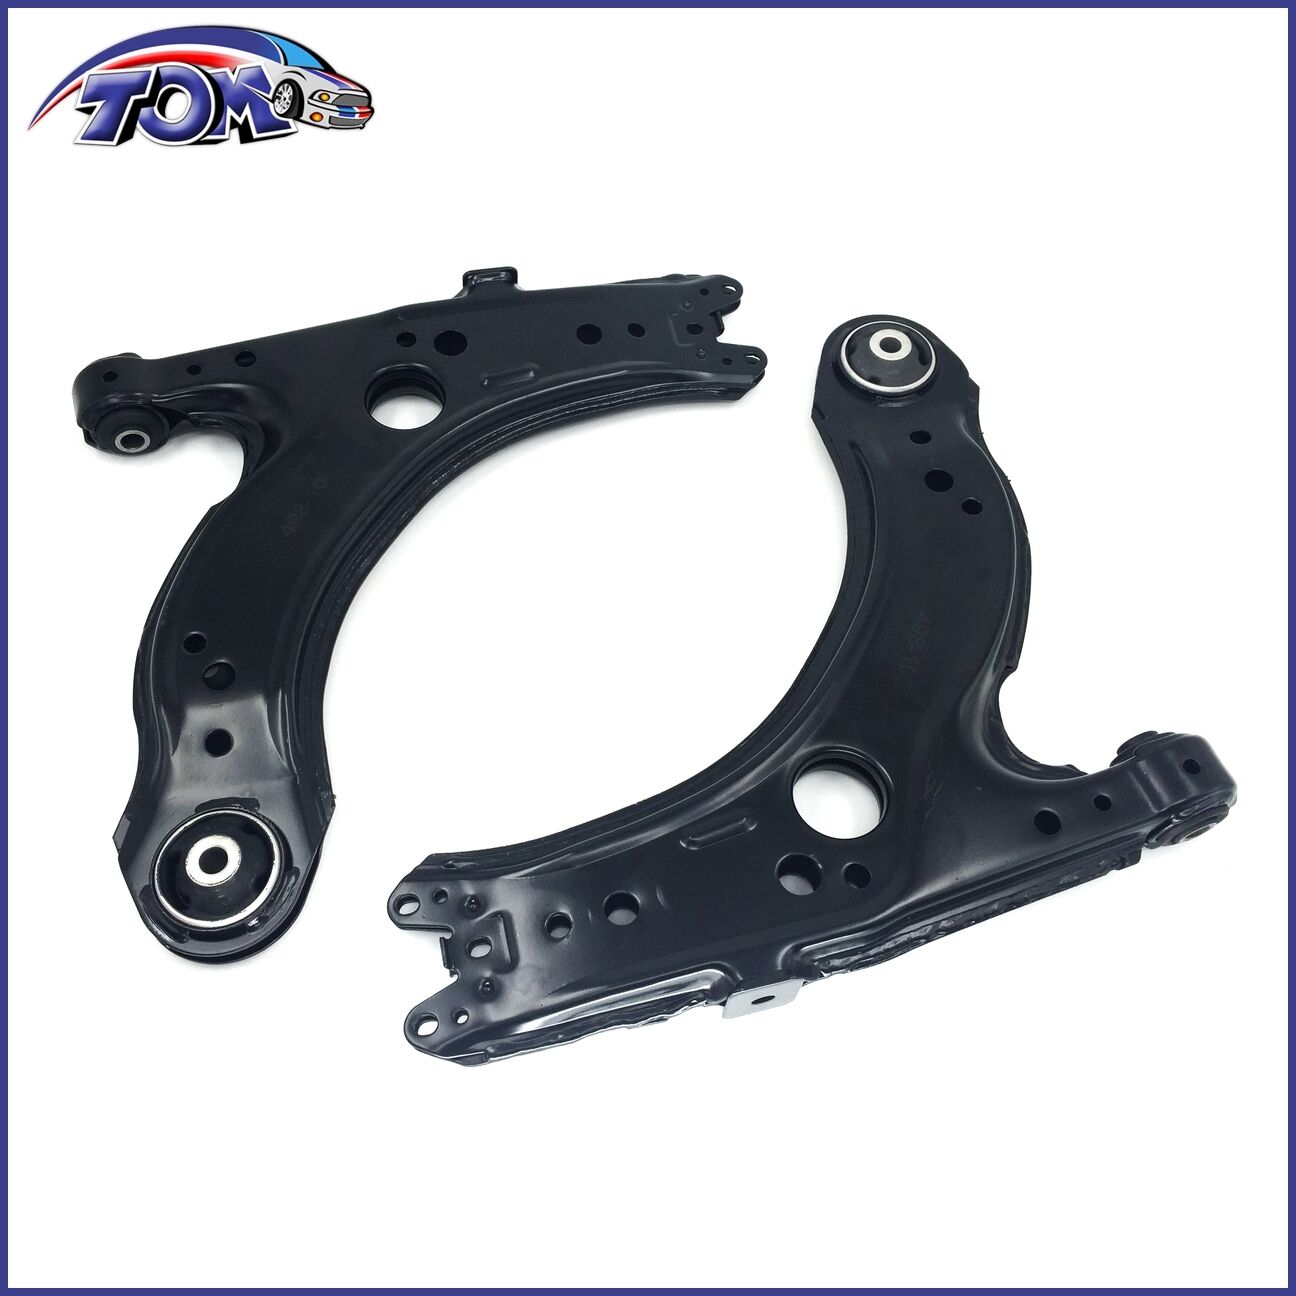 New Pair Of 2 Front Lower Control Arms For Volkswagen Beetle Golf Jetta